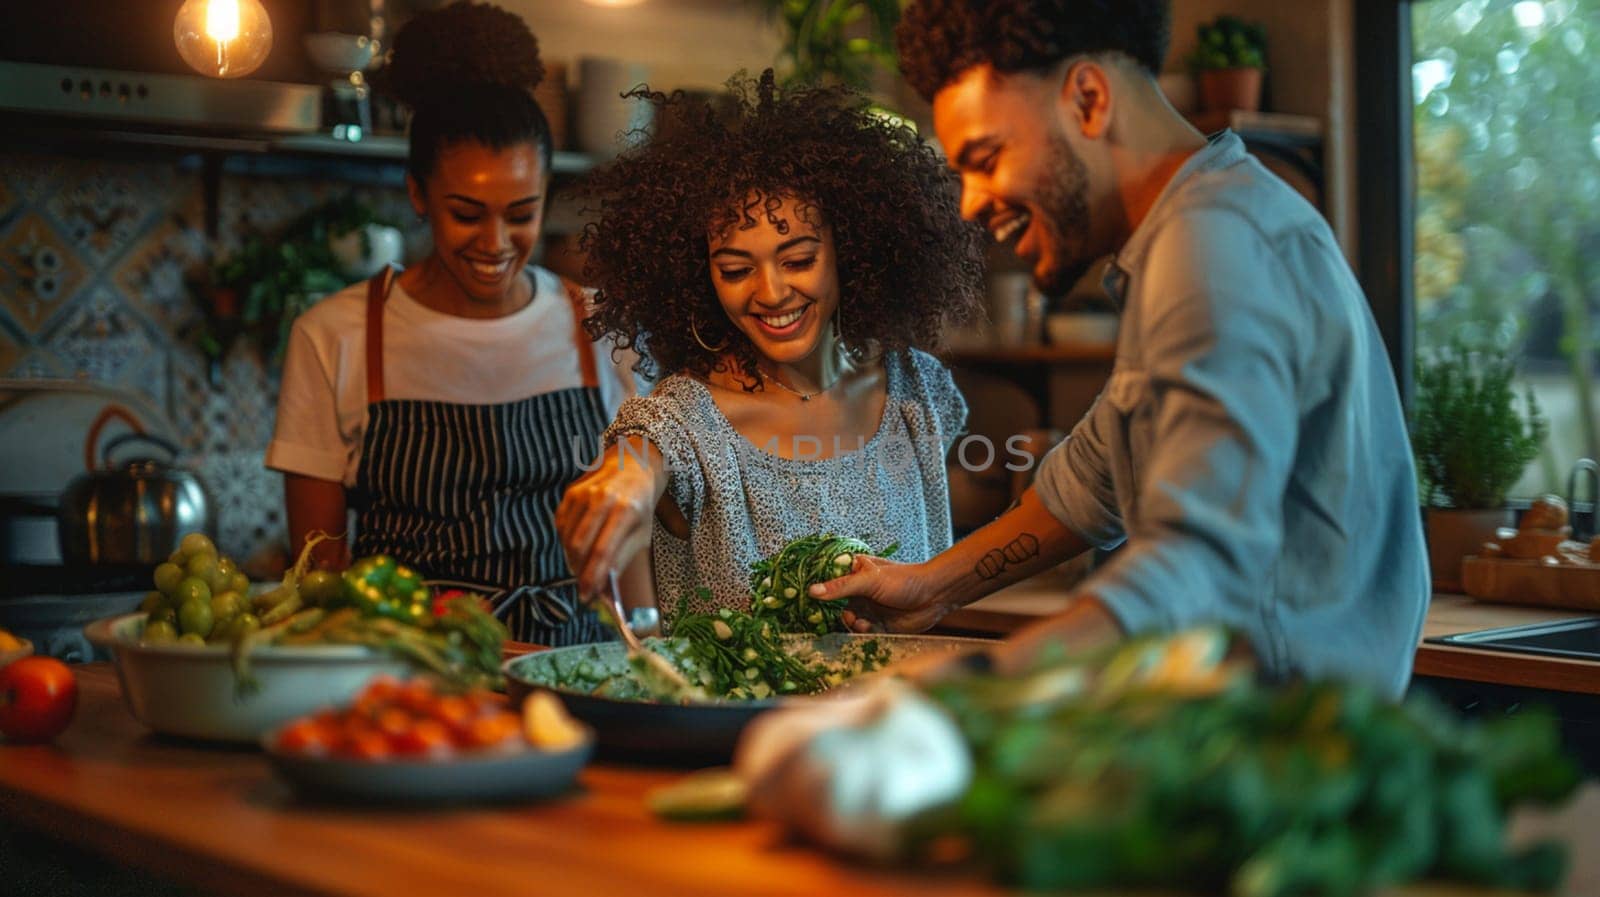 Three diverse mixed race vegan friends are smiling and laughing while preparing food in a kitchen by verbano